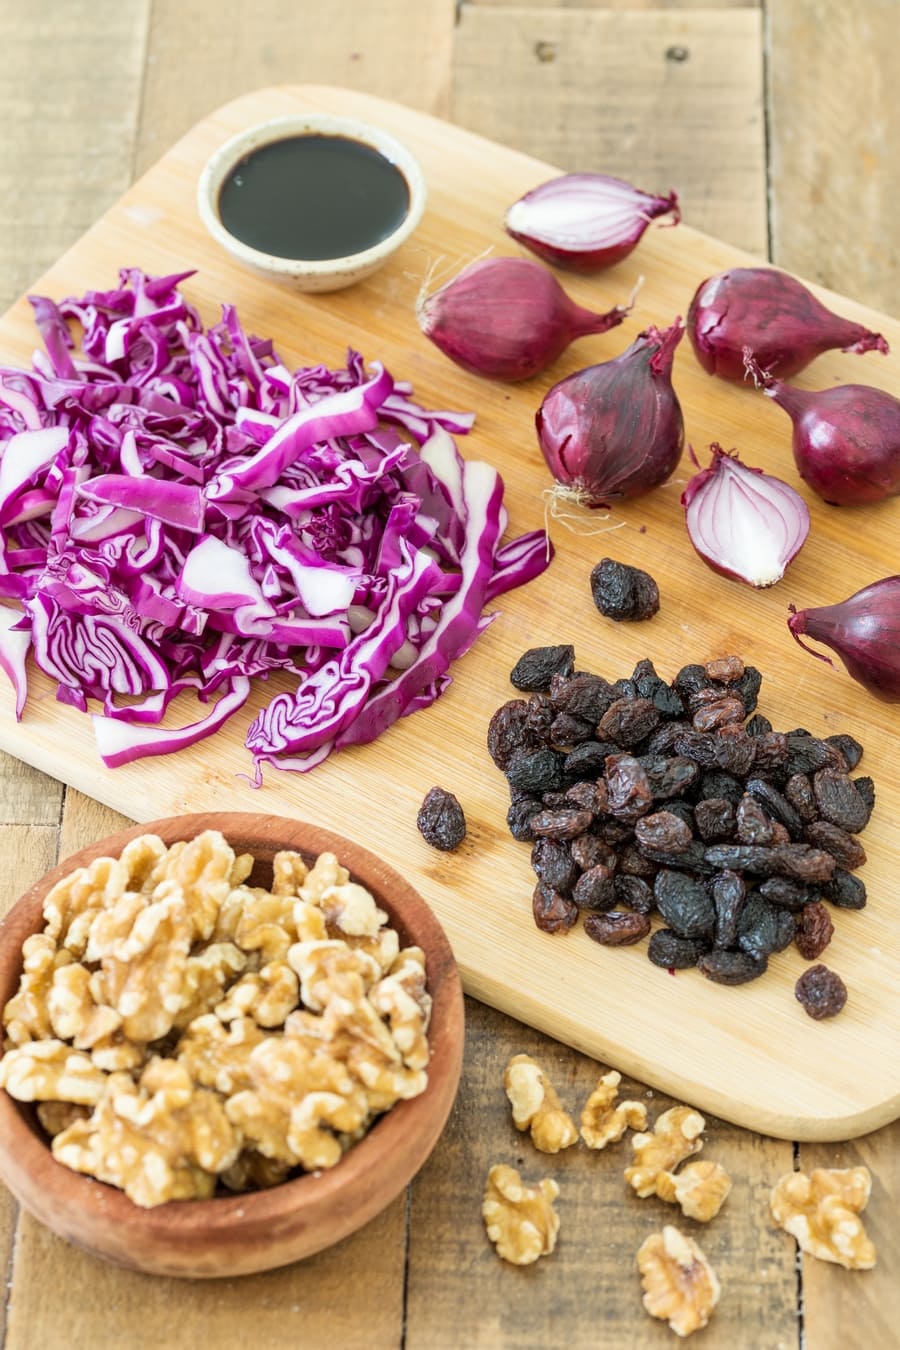 Shredded red cabbage, raisins, red onions on a chopping board, walnuts and balsamico in small bowls.